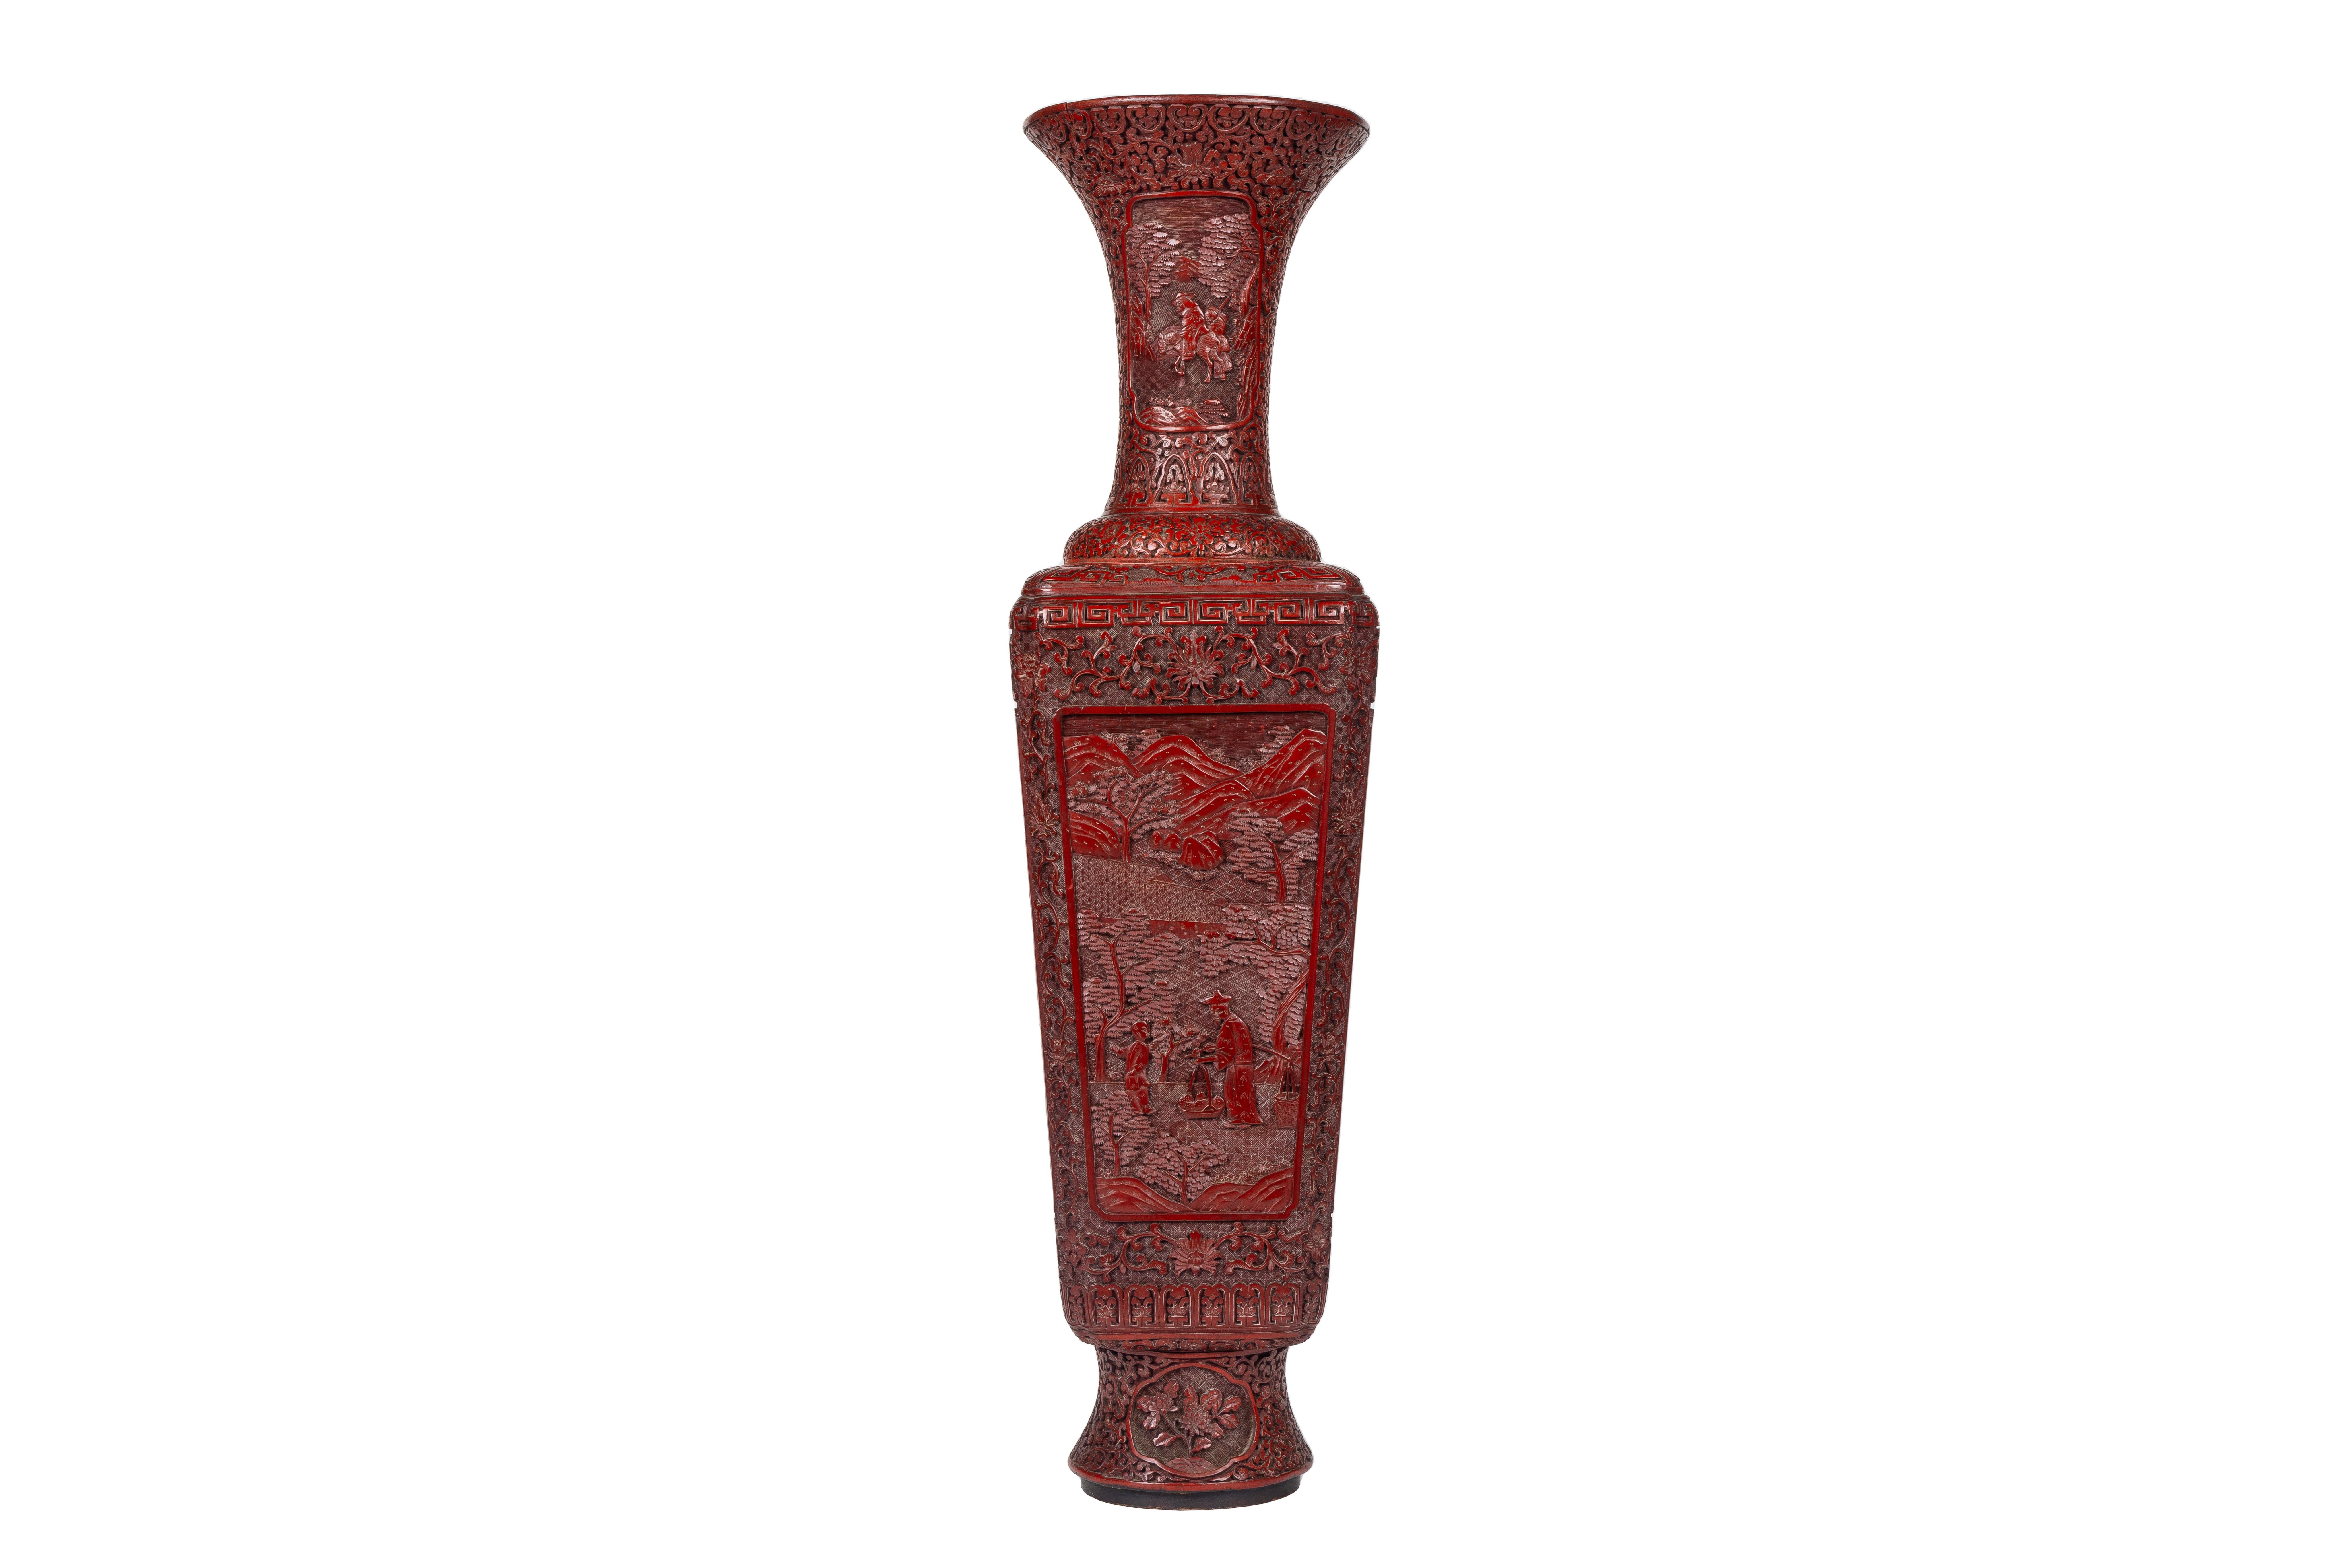 Introducing an extraordinary and exceptionally rare pair of Chinese Cinnabar Carved Lacquer Vases from the Qianlong period. These monumental vases stand as magnificent examples of Chinese craftsmanship and artistic finesse, featuring surface